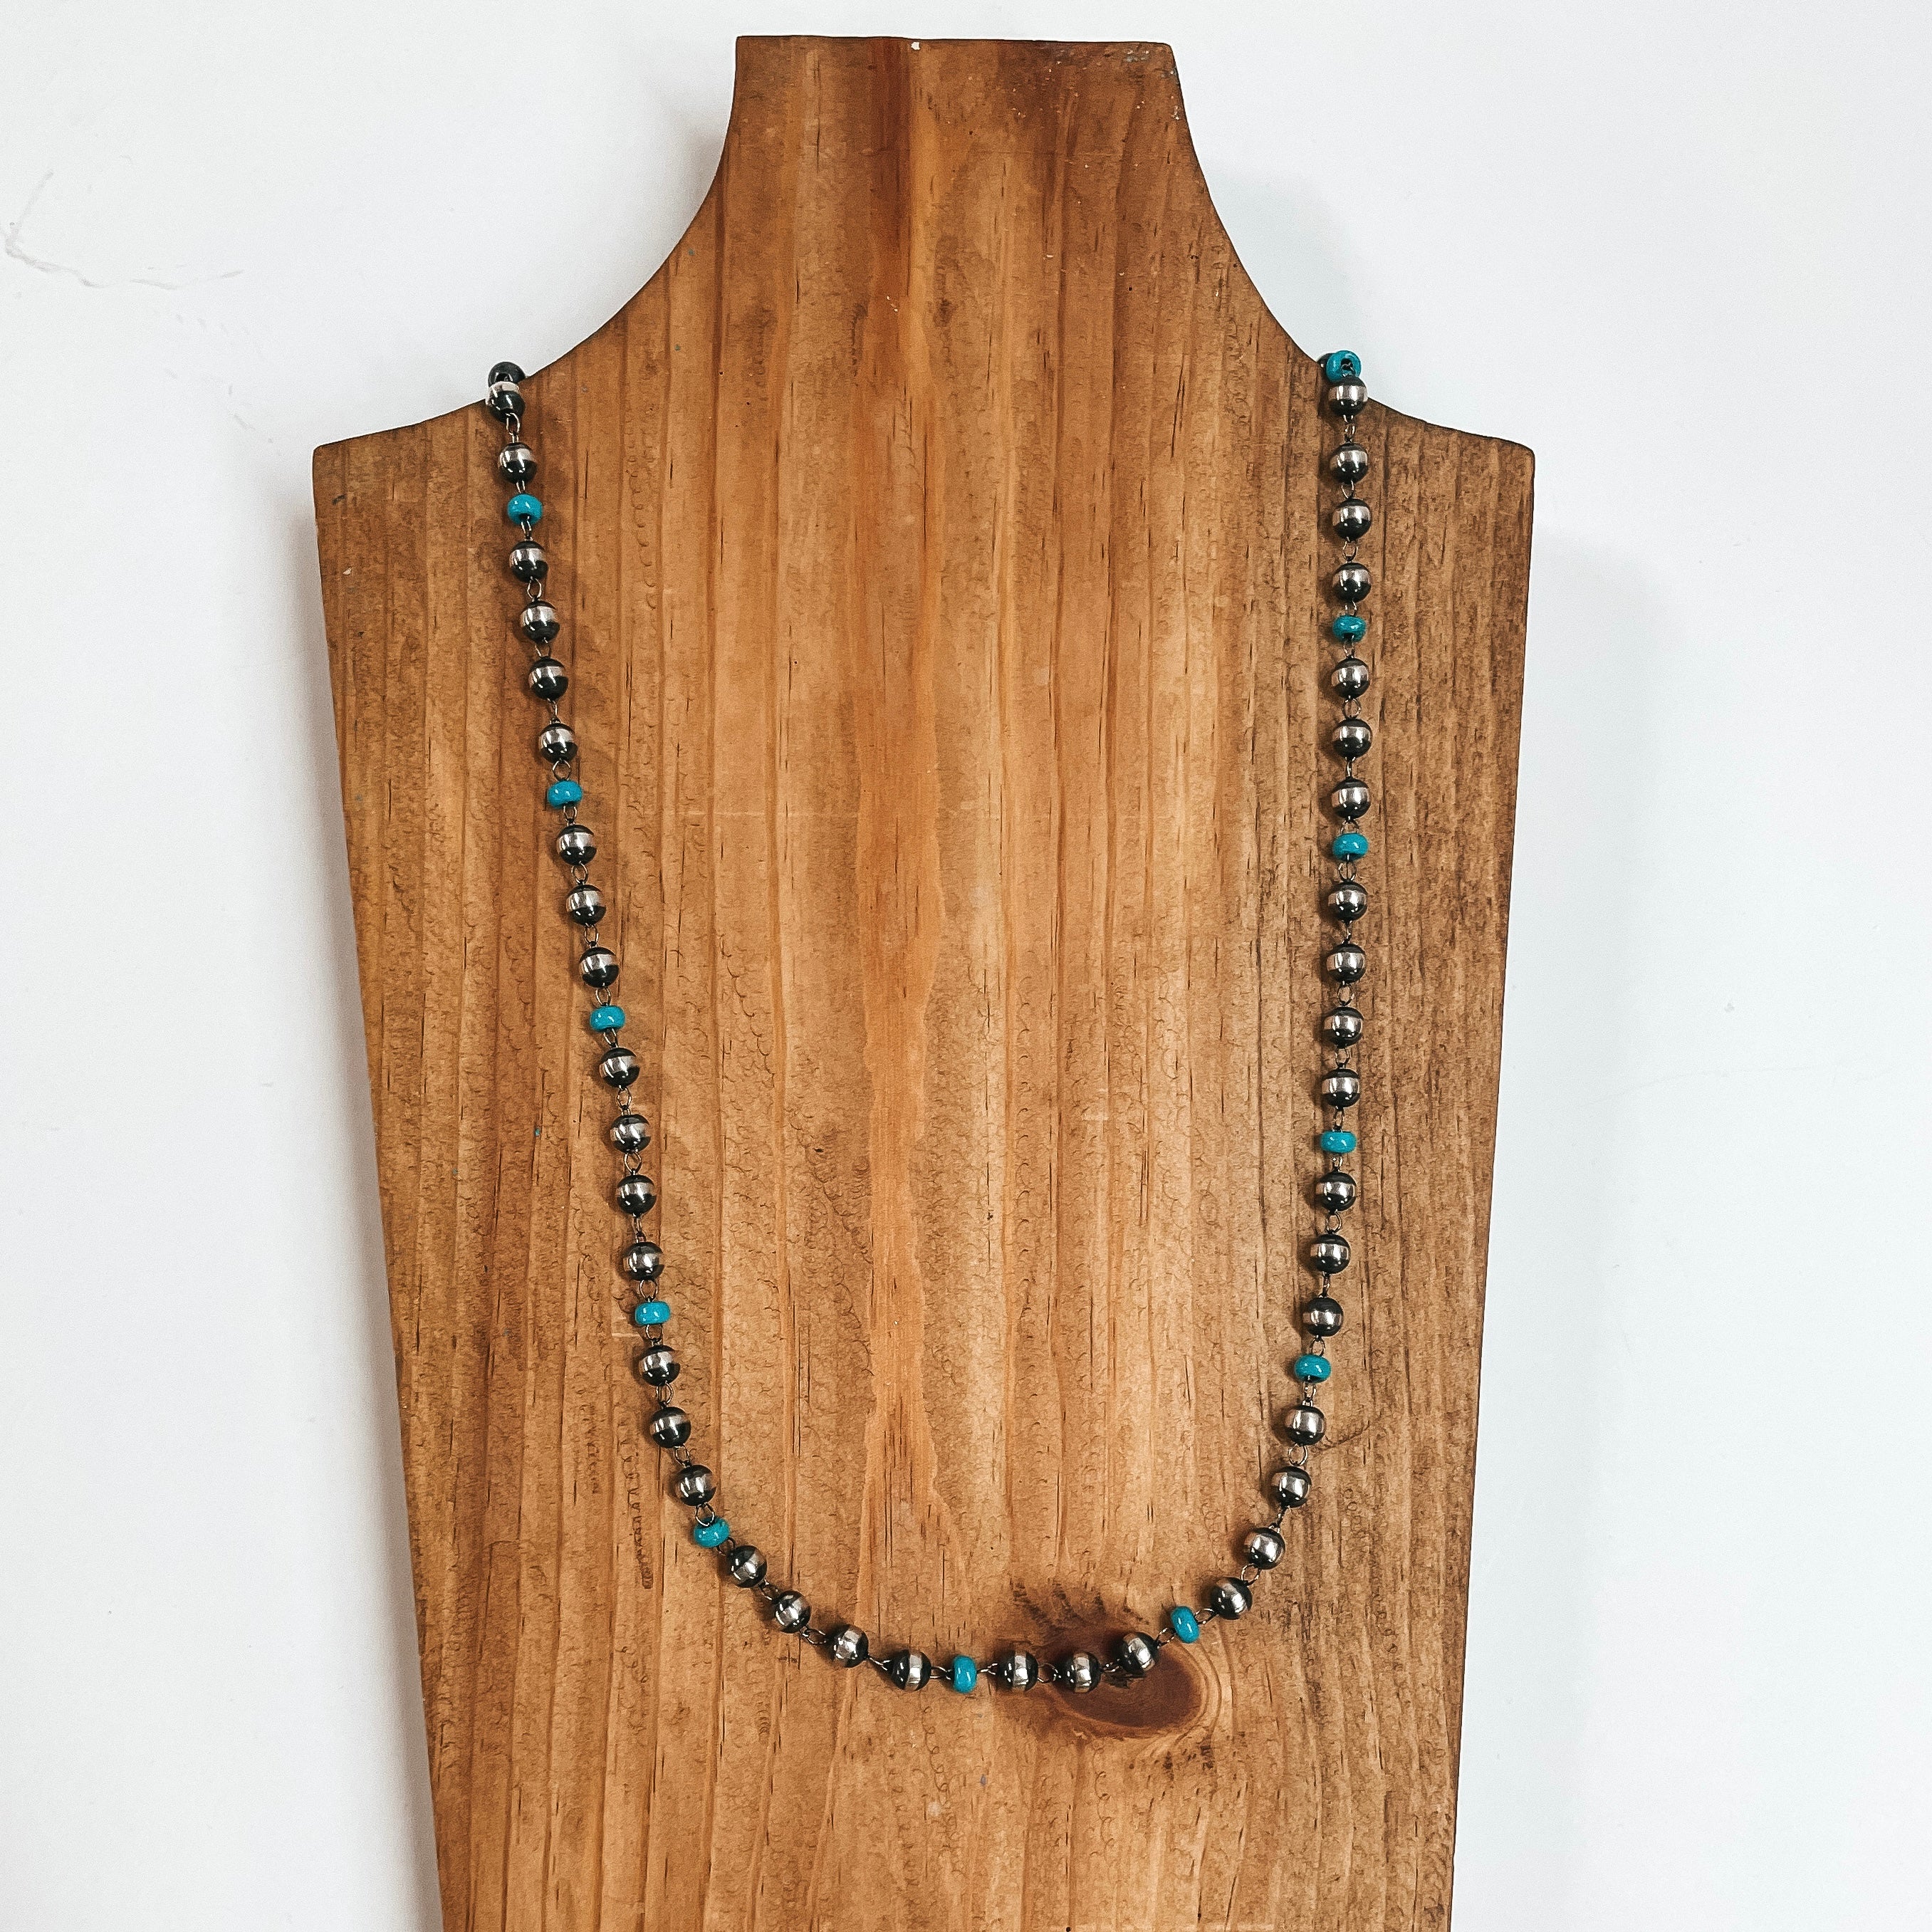 Navajo | Navajo Handmade Sterling Silver 6mm Navajo Pearl Necklace with Turquoise Beads | 24" - Giddy Up Glamour Boutique